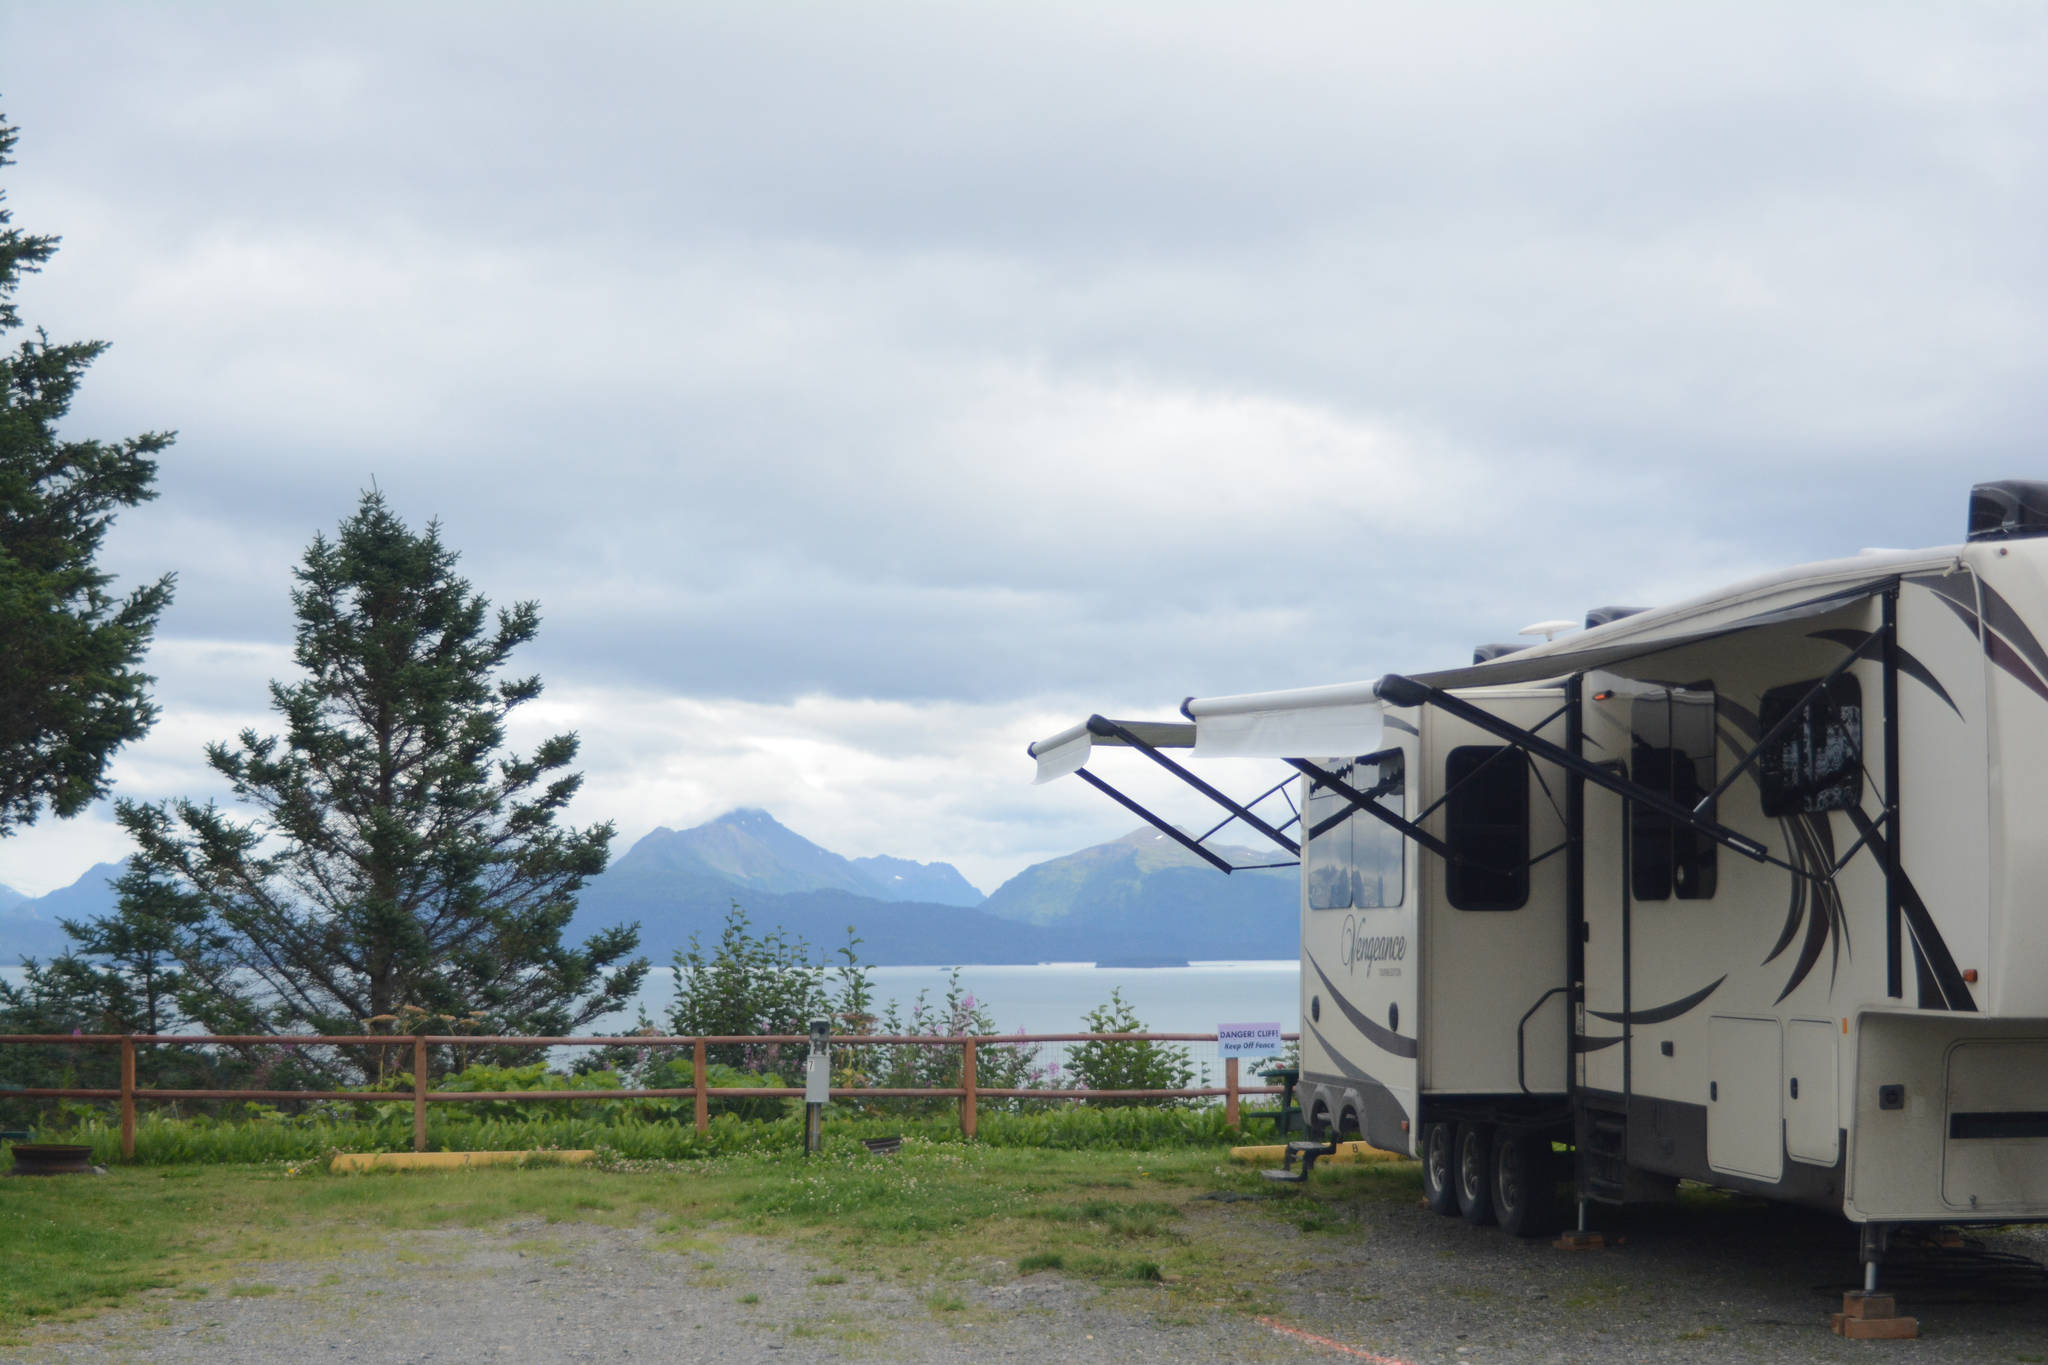 A campsite at Homer/Baycrest KOA Holiday looks out over Kachemak Bay near Baycrest Hill in Homer, Alaska, on Aug, 18, 2018. The park became a Kampgrounds of America facility this summer, KOA announced this month in a press release. (Photo by Michael Armstrong/Homer News)